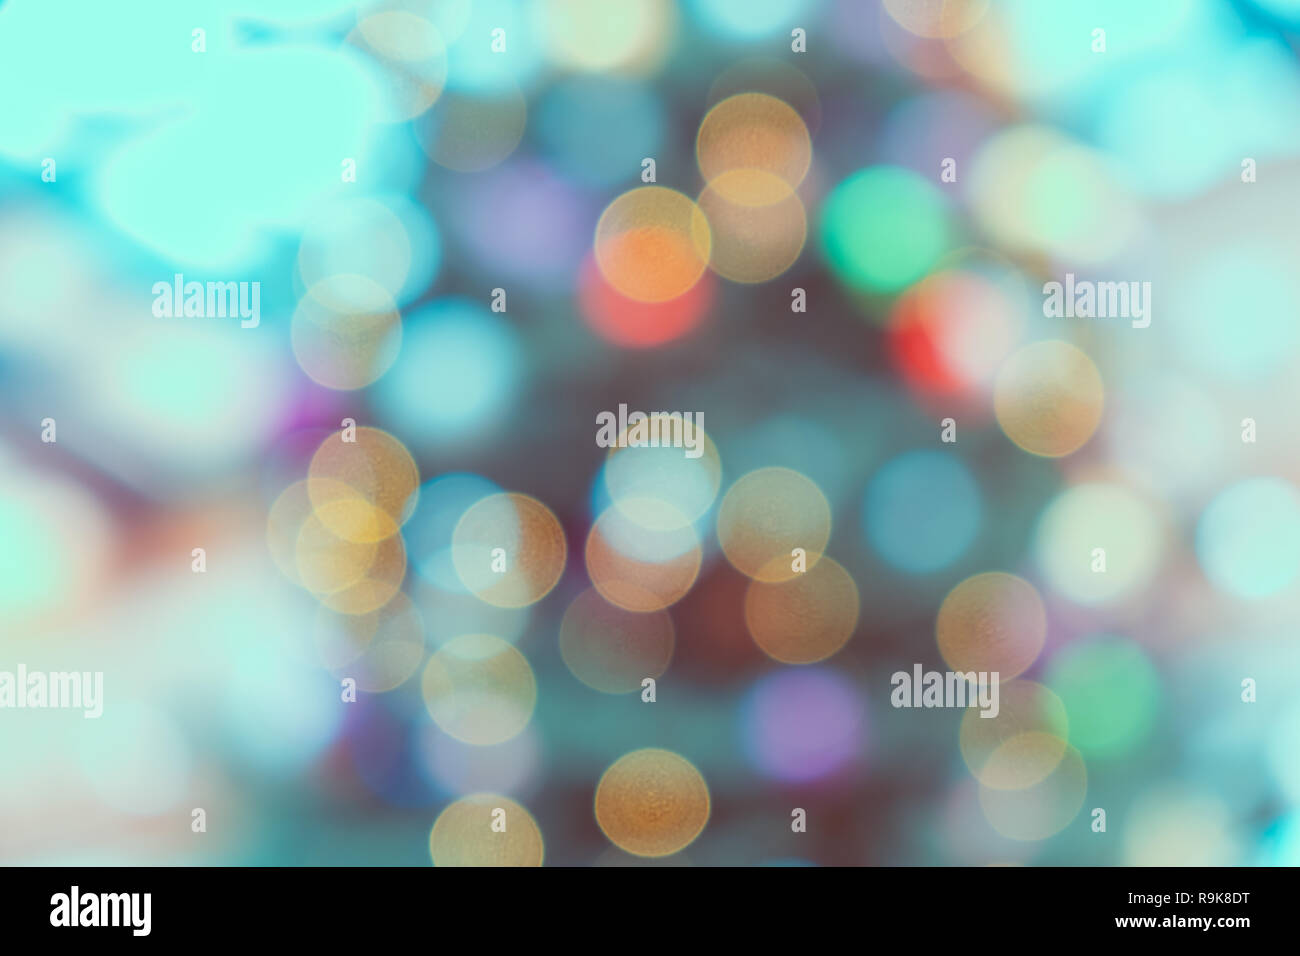 colored abstract blurred light background layout design can be use for ...